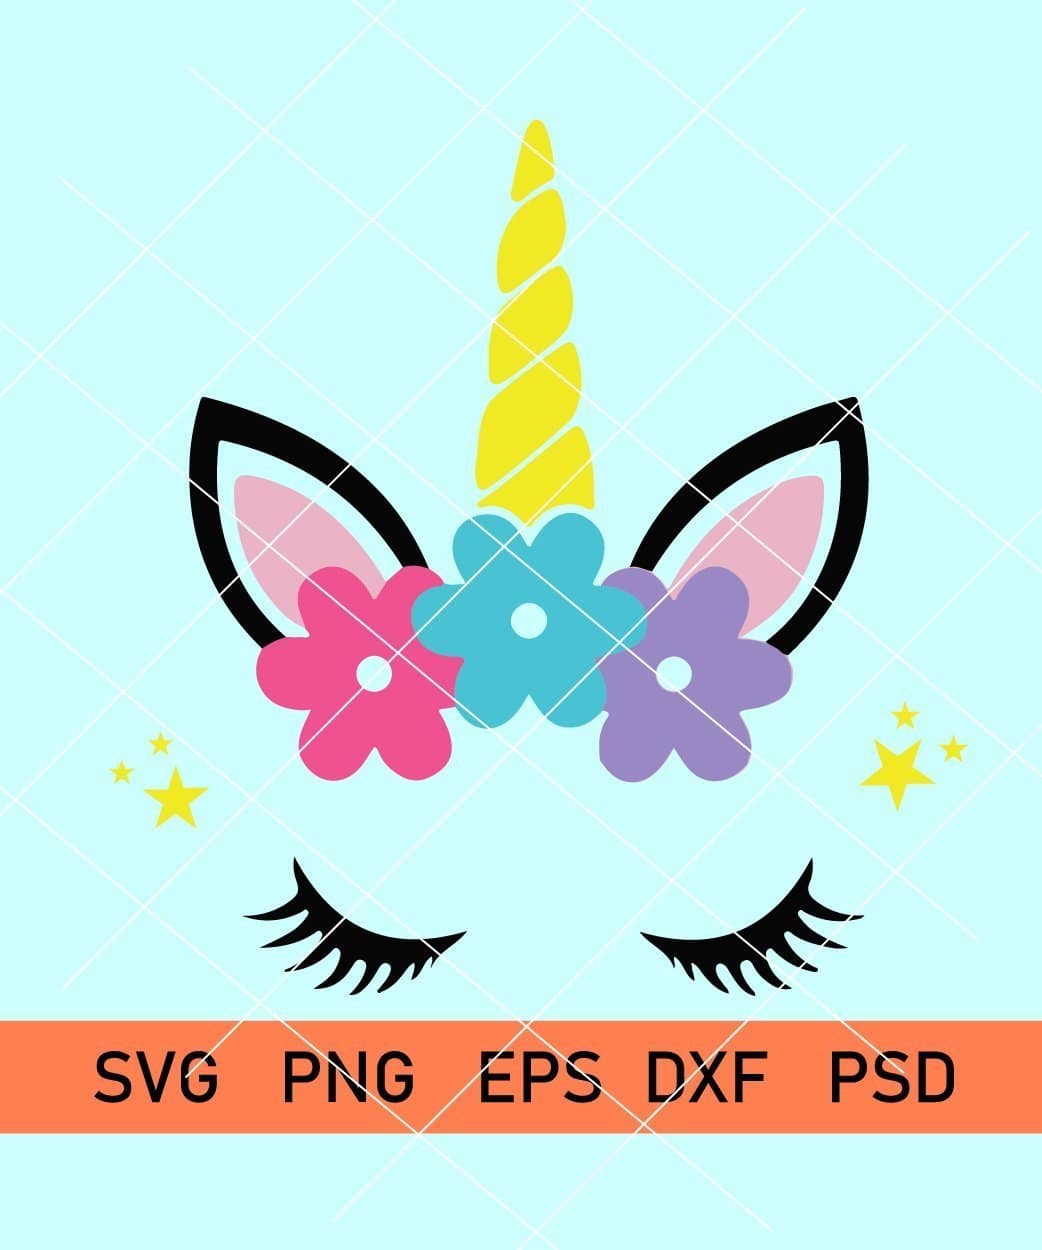 Unicorn Head SVG, Unicorn Face SVG, Unicorn Svg, Unicorn with Flowers